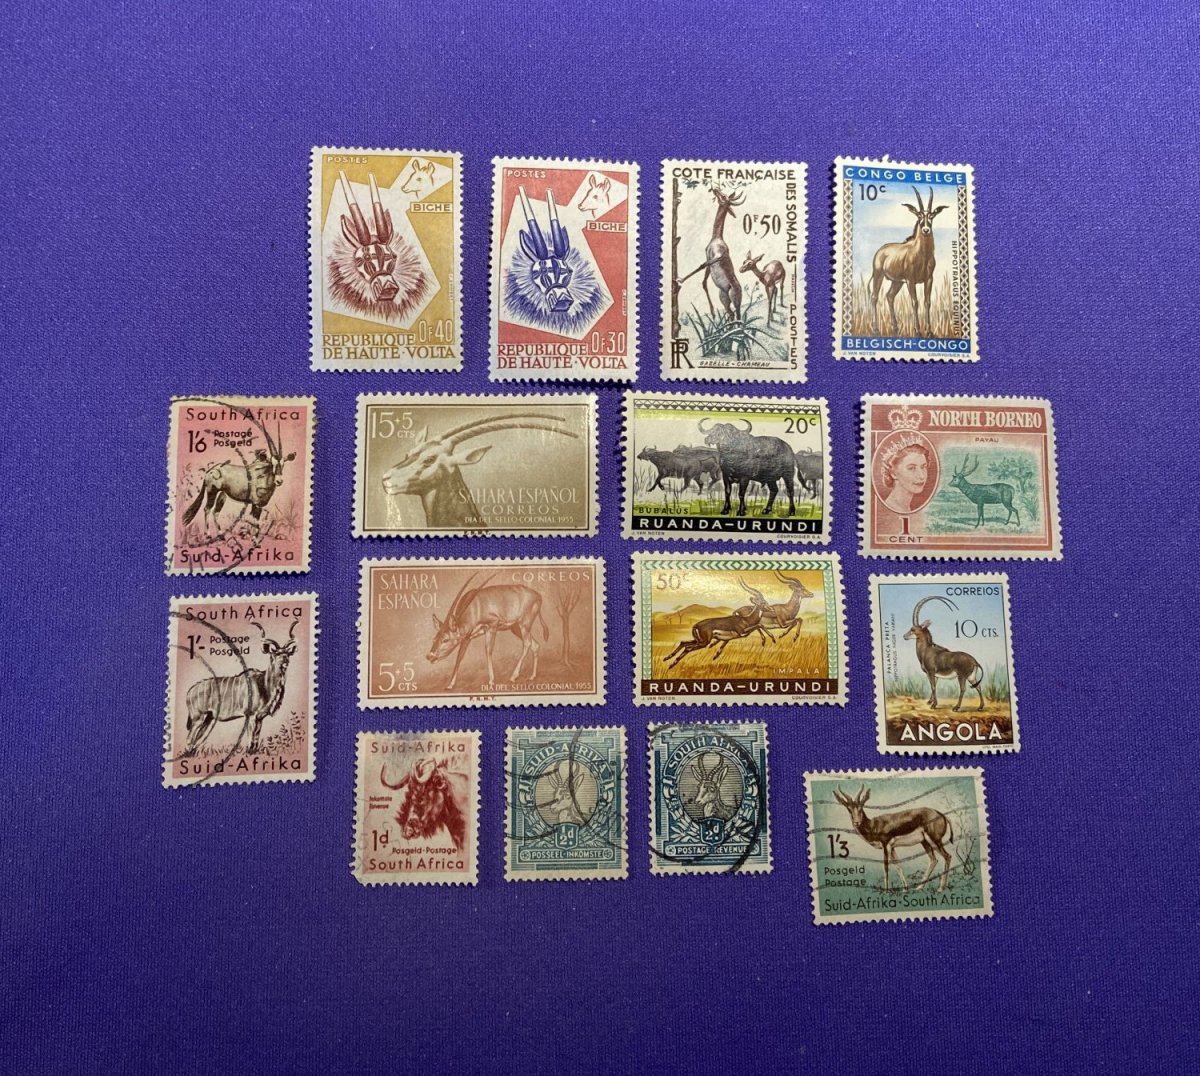 1108:: 16 Animal Stamps, 1950s, 8 Countries: 10 different antelopes, red  deer, wildebeest, cape buffalo